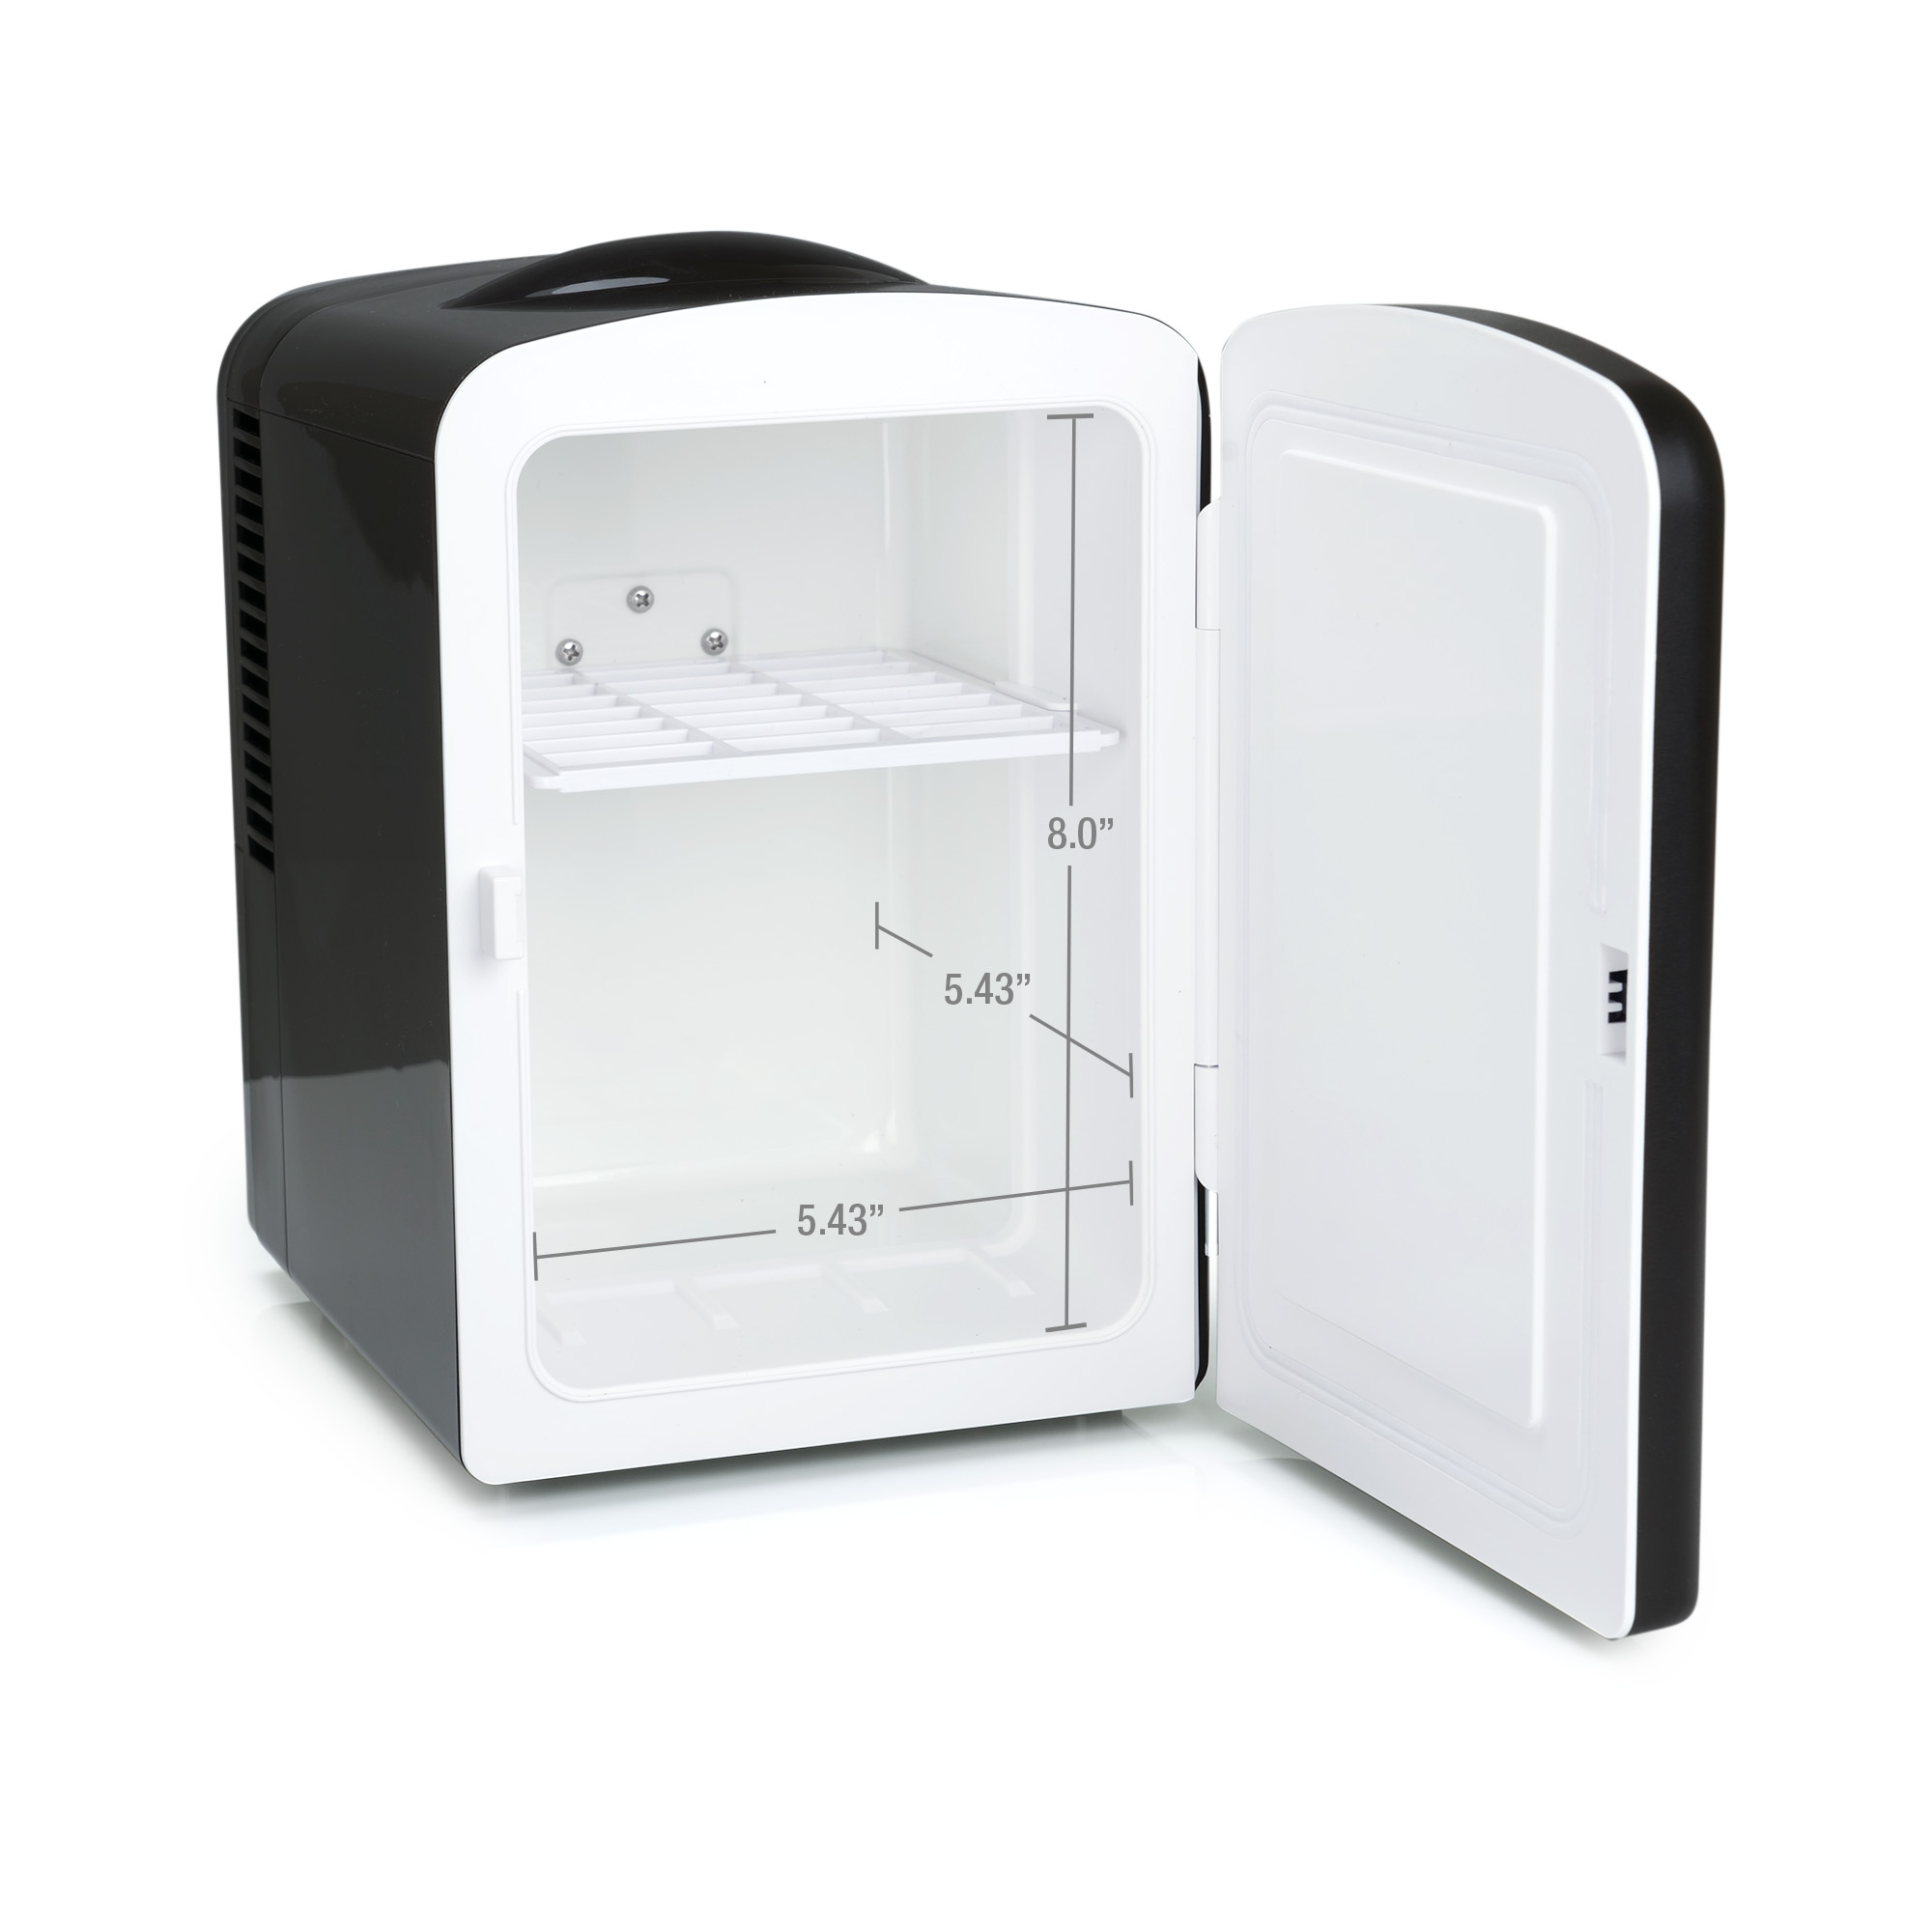 Personal Chiller 6 Can Mini Fridge Beverage and Skincare Refrigerator, Black - image 3 of 5